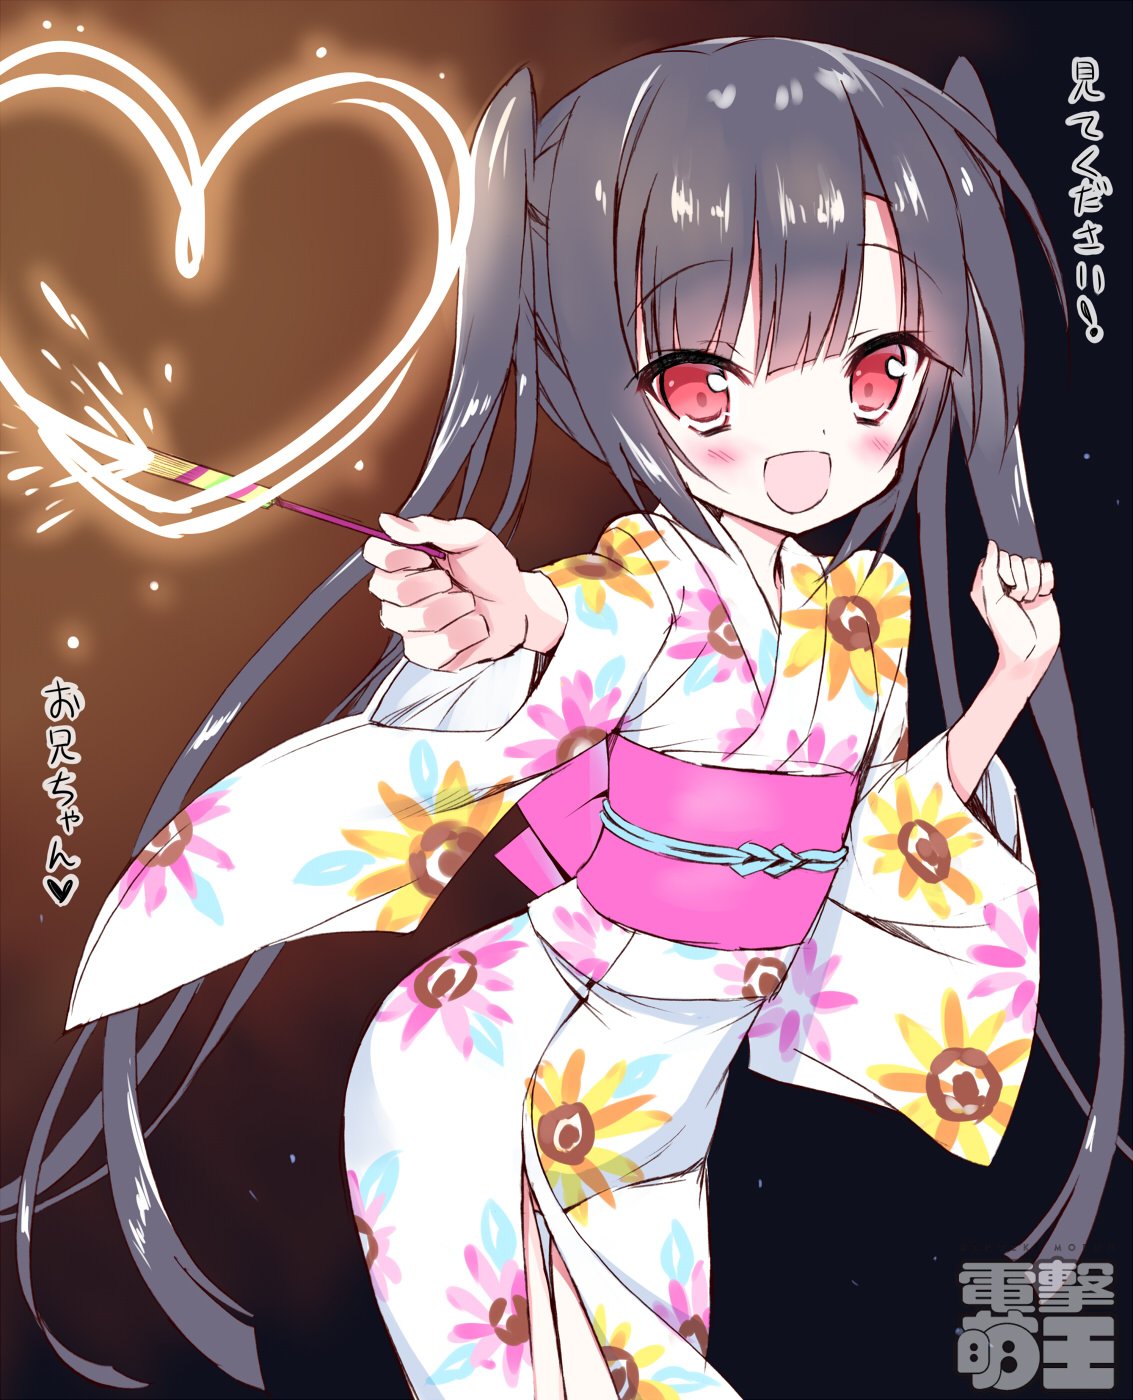 1girl arm_up black_hair blush clenched_hands dengeki_moeou dokidoki_sister_aoi-chan fireworks floral_print heart highres holding japanese_clothes kimono kohinata_aoi_(dokidoki_sister_aoi-chan) leaning_forward long_hair night obi open_mouth outstretched_arm red_eyes sash smile solo sparkler takahashi_tetsuya translated twintails very_long_hair watermark yukata